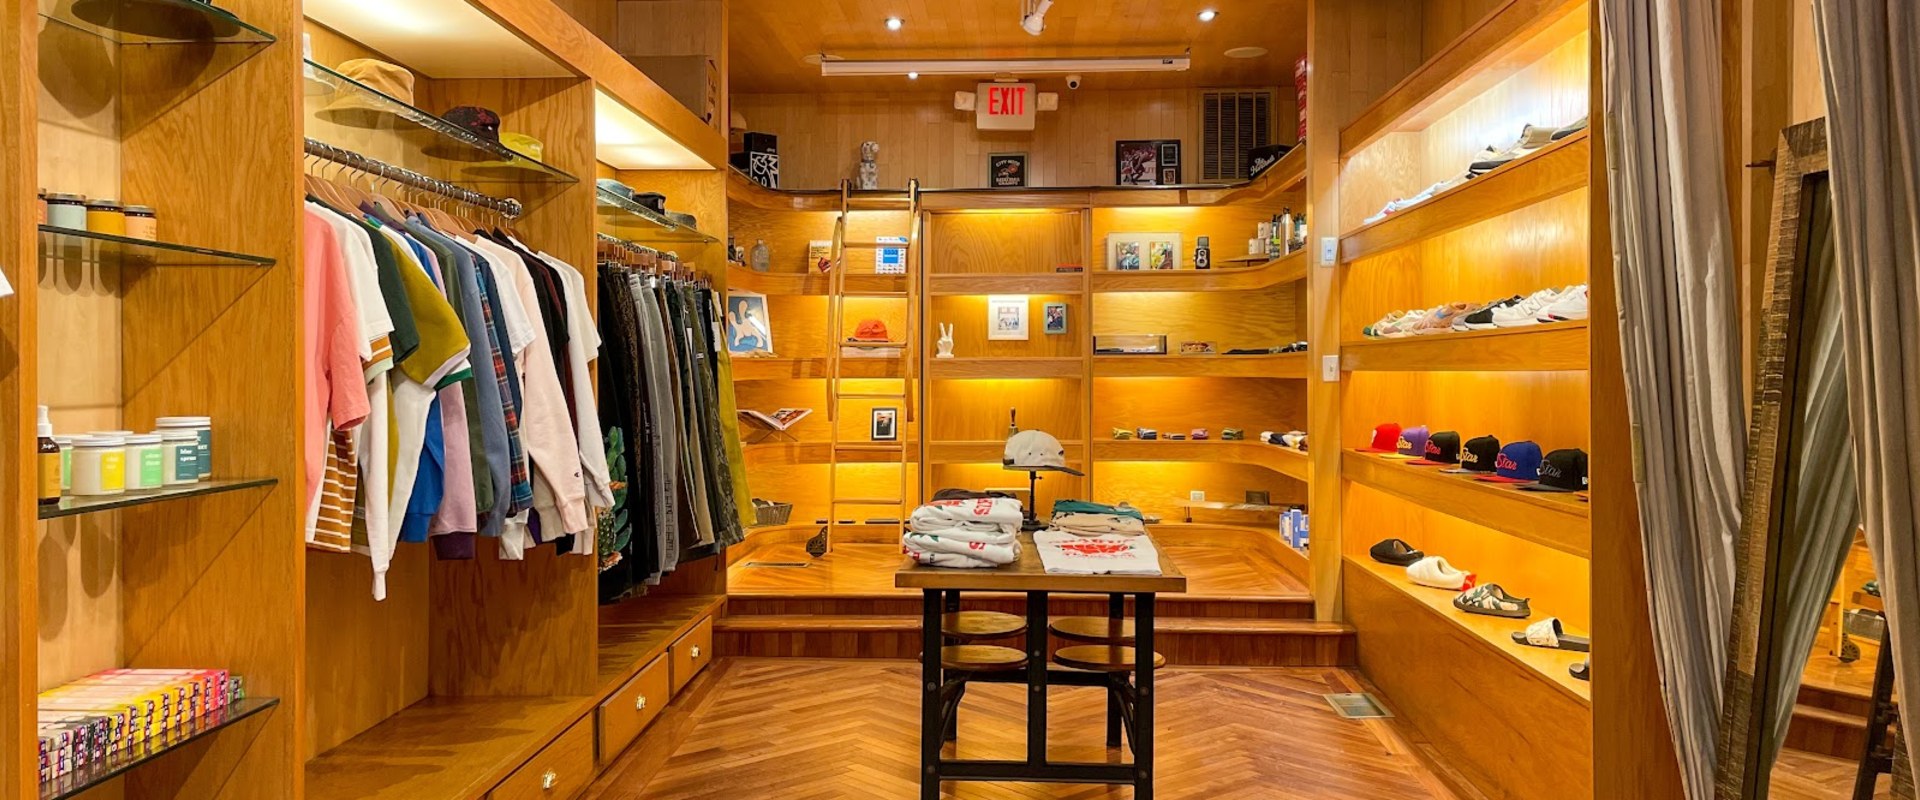 Sustainable Fashion Options in Philadelphia's Boutiques